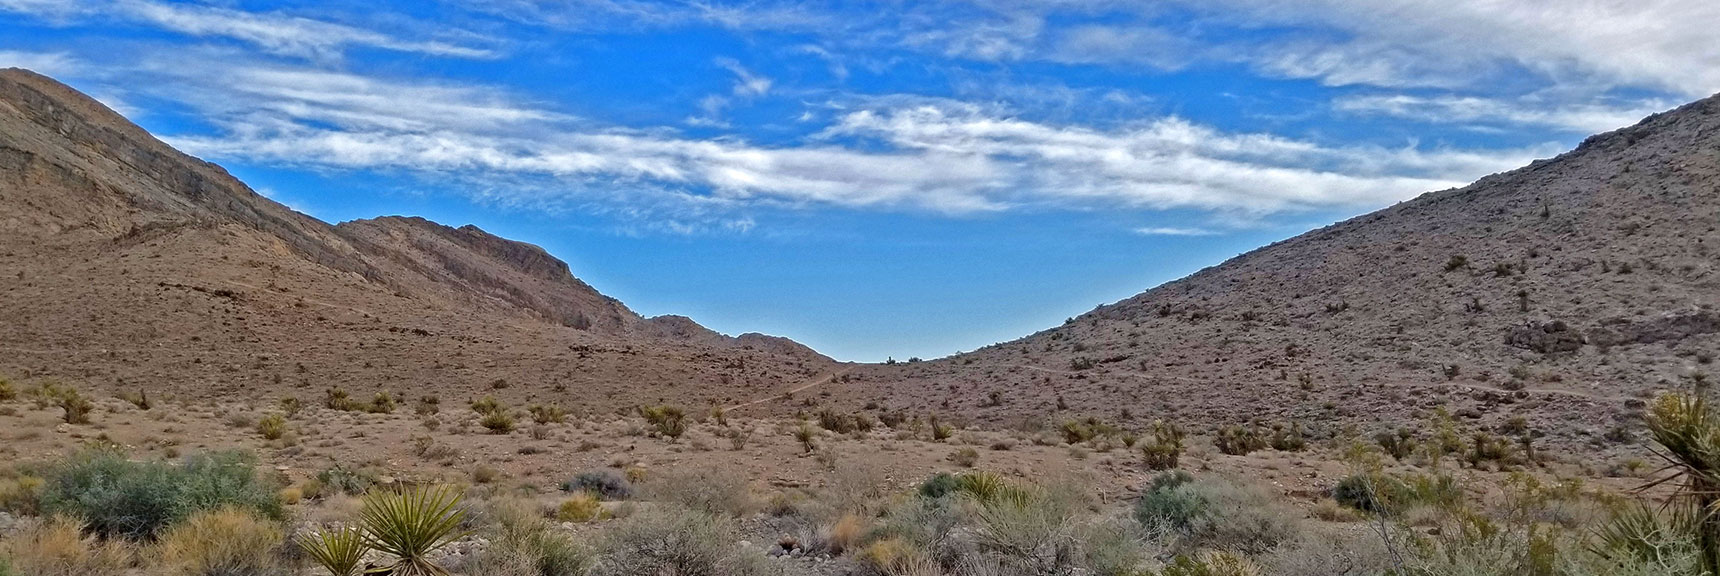 Saddle in the Ridge System on North (Right) Side of Canyon | Little Red Rock Las Vegas, Nevada, Near La Madre Mountains Wilderness